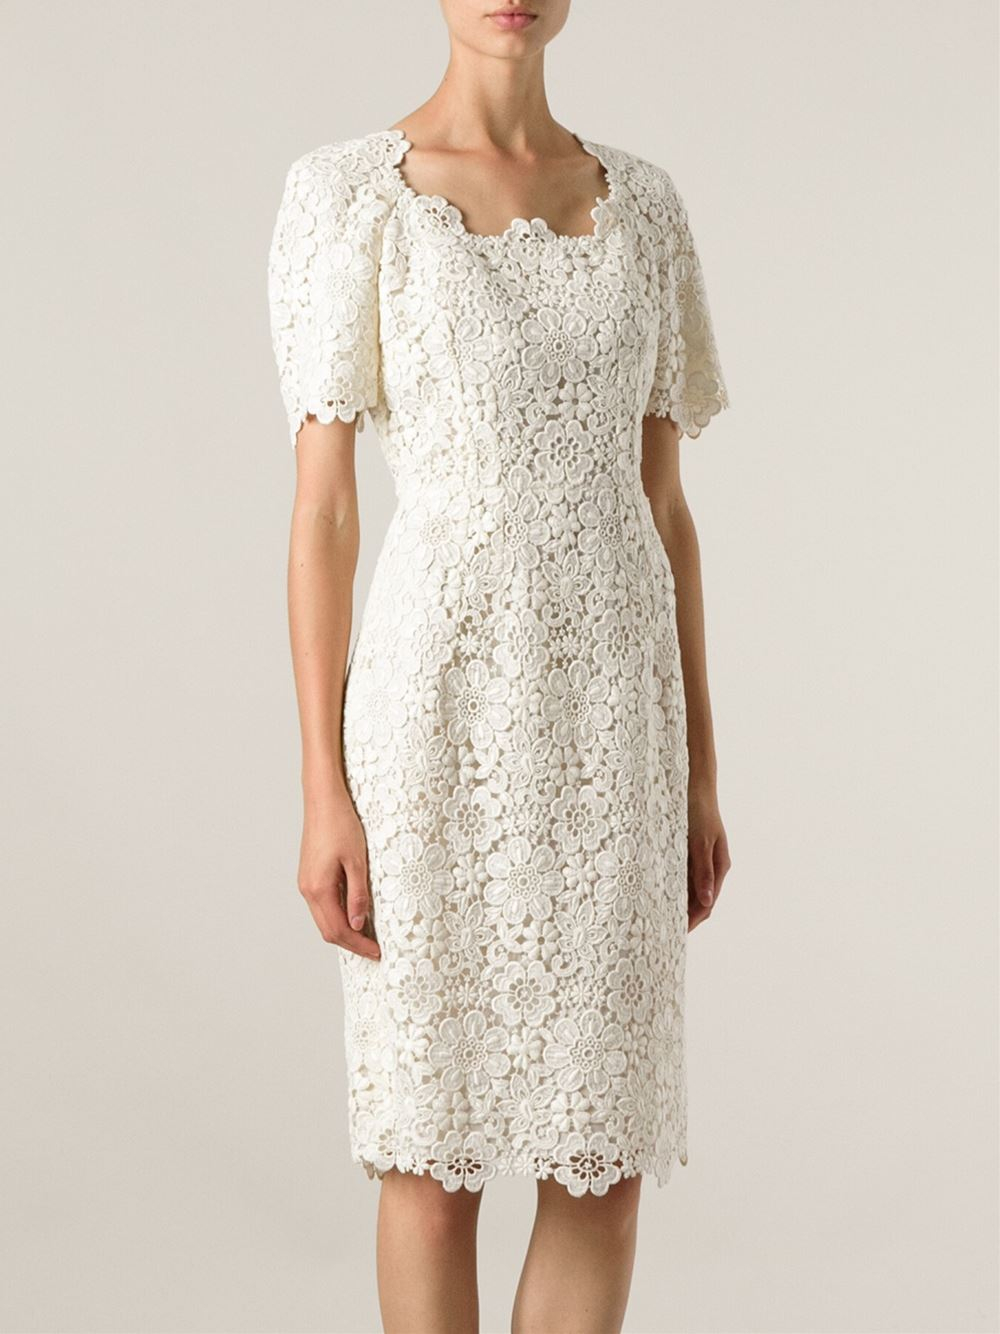 Dolce ☀ Gabbana Floral Lace Dress in ...